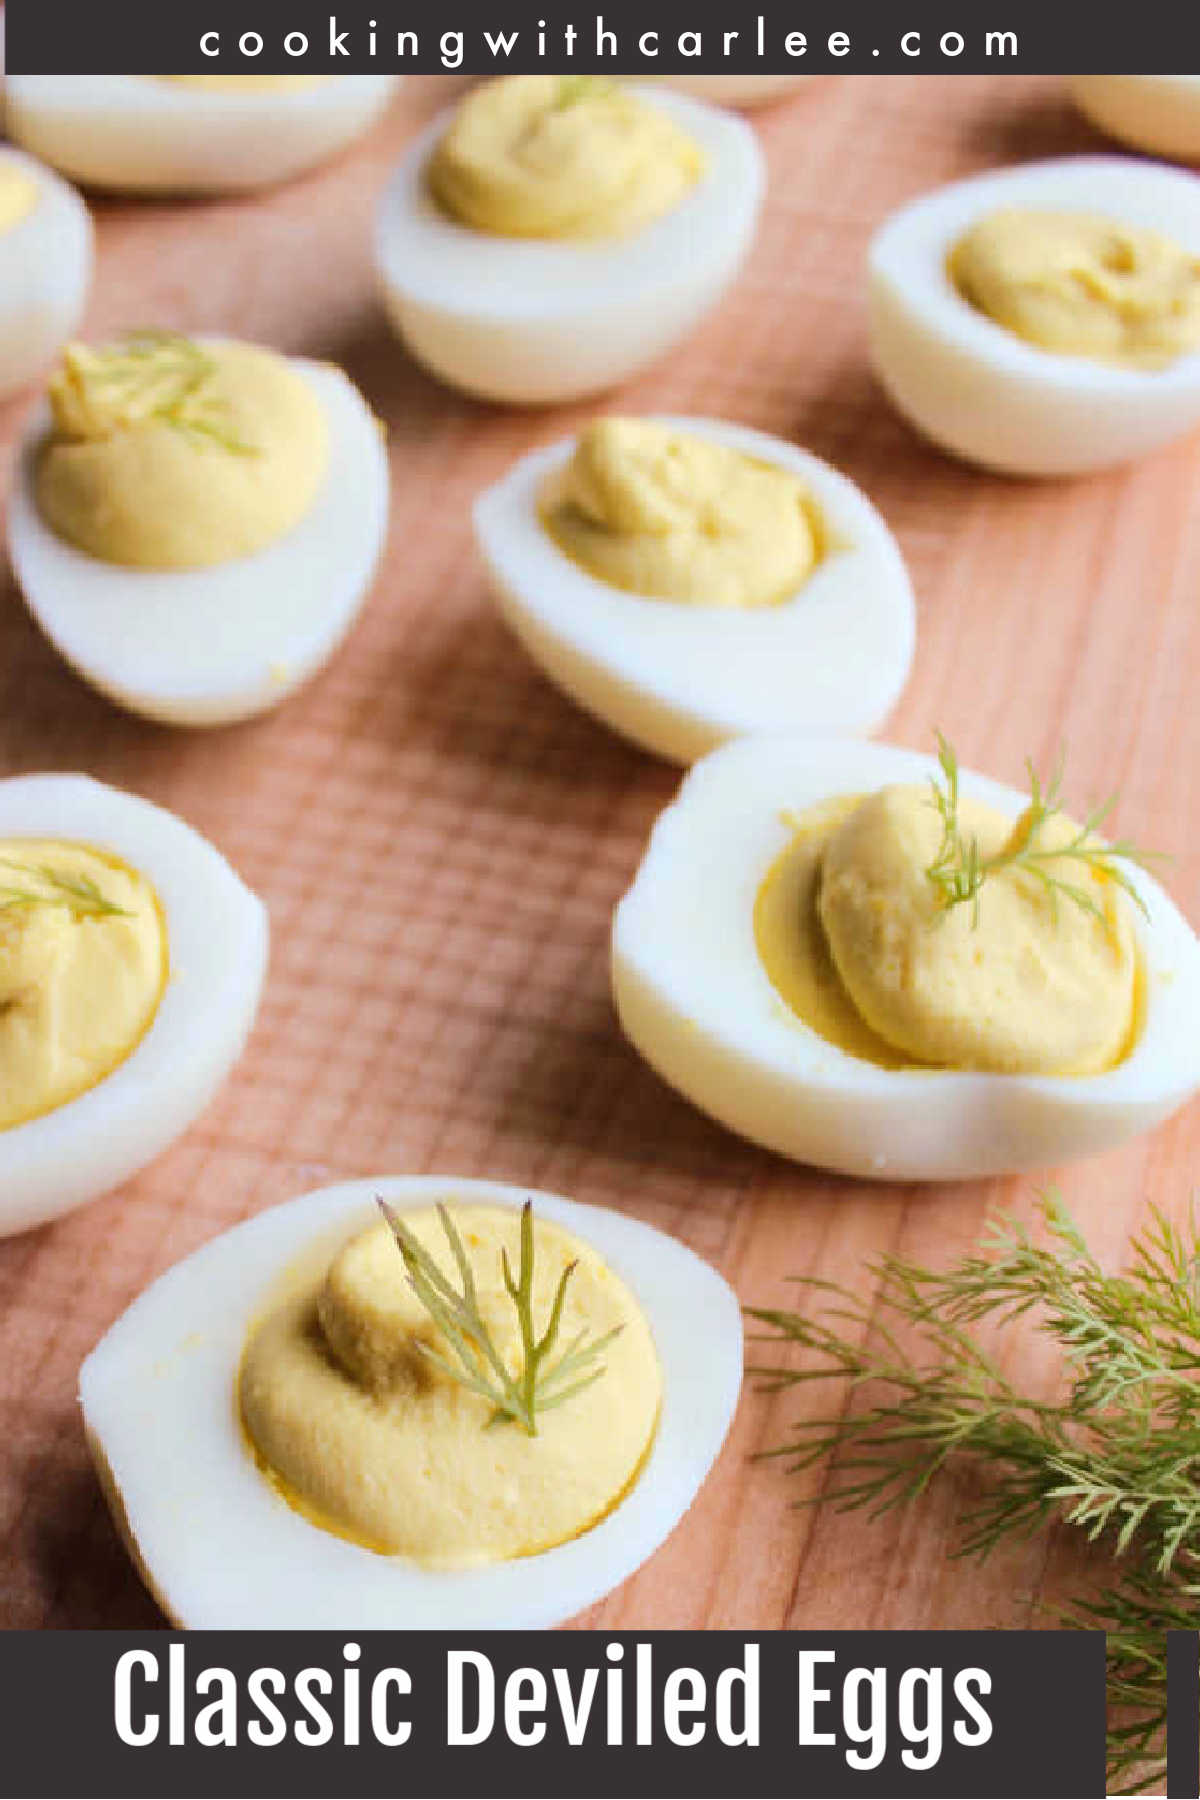 These deviled eggs are everything you'd want them to be. They are creamy, tangy and just a tiny bit sweet.  They are perfect for snacking on, great for picnics and potlucks and a must at a BBQ. Follow MiMi's tips and tricks to get perfect deviled eggs every time. But don't be surprised if they disappear right before your very eyes.